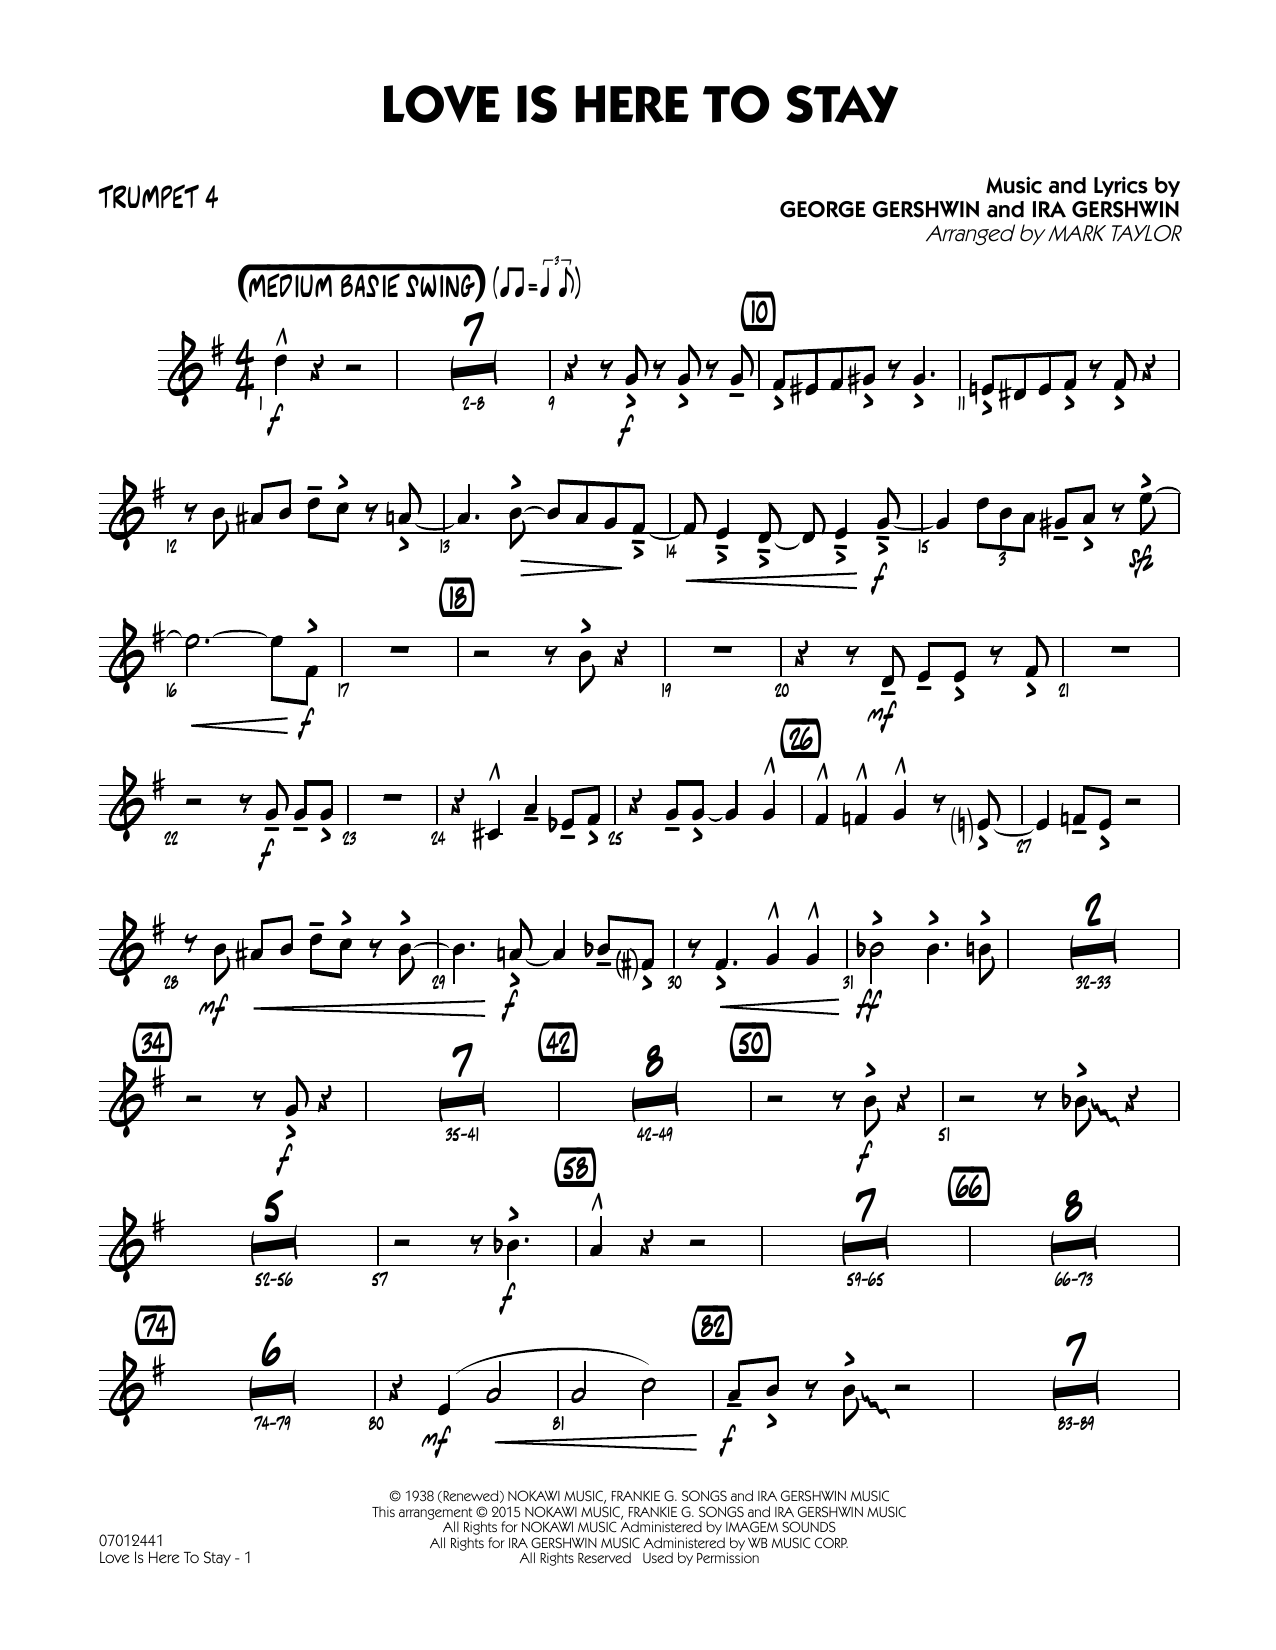 Mark Taylor Love Is Here to Stay - Trumpet 4 sheet music notes and chords. Download Printable PDF.